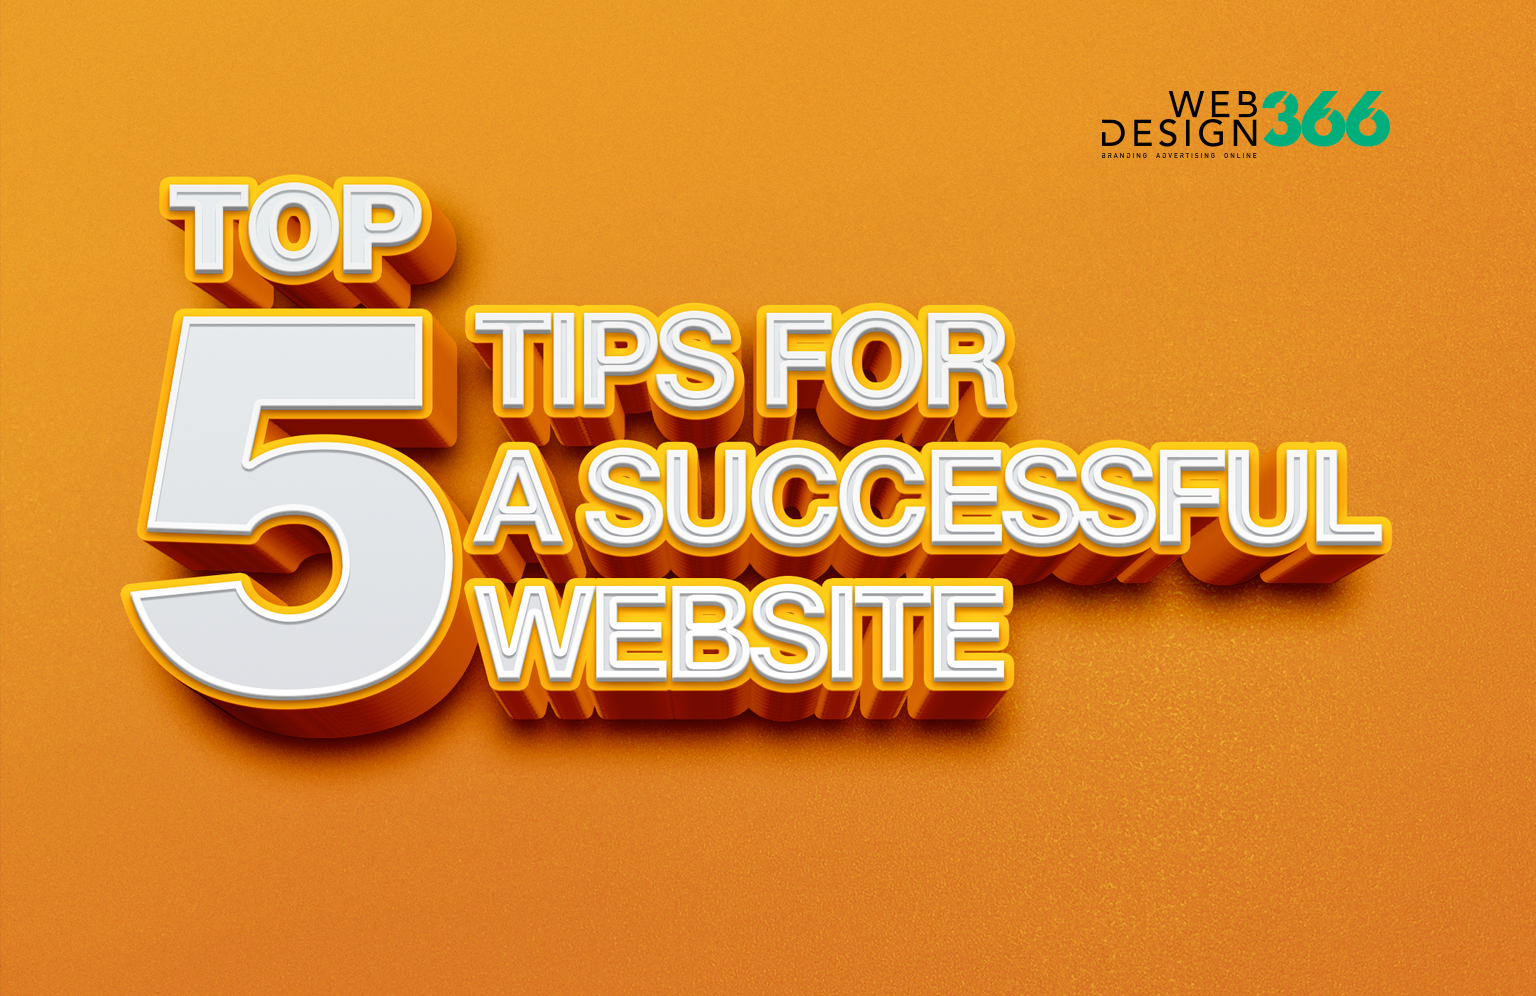 5 Top Tips for a Successful Website